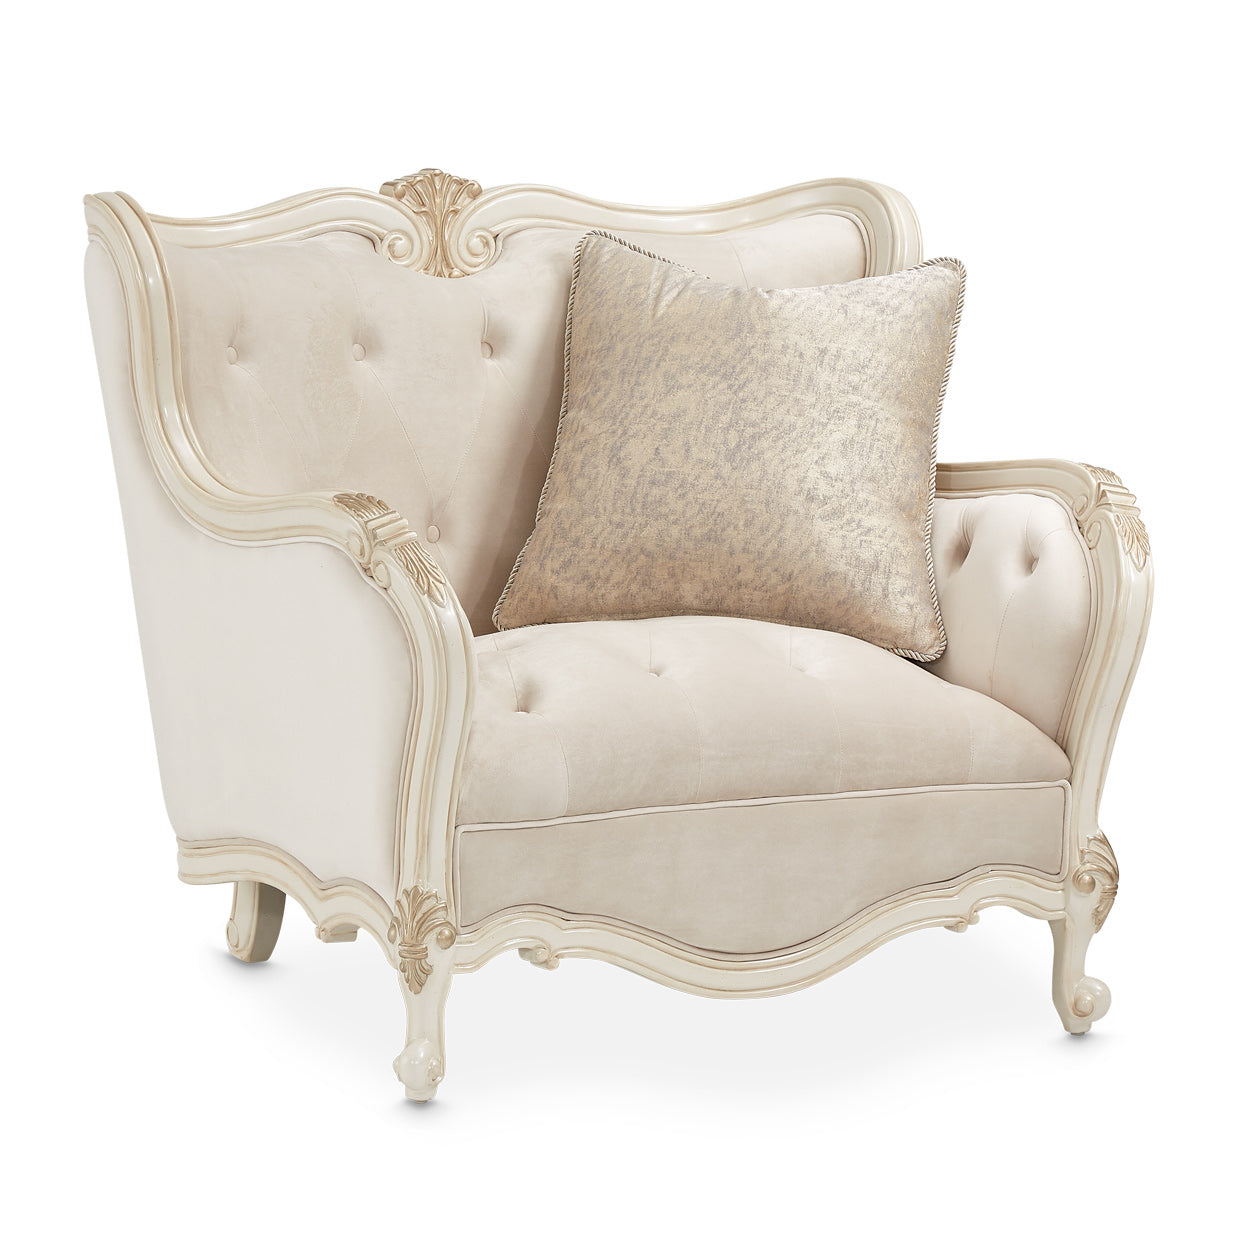 LAVELLE-CLASSIC PEARL Lavelle Chair And A Half Ivory Classic Pearl - Dream art Gallery